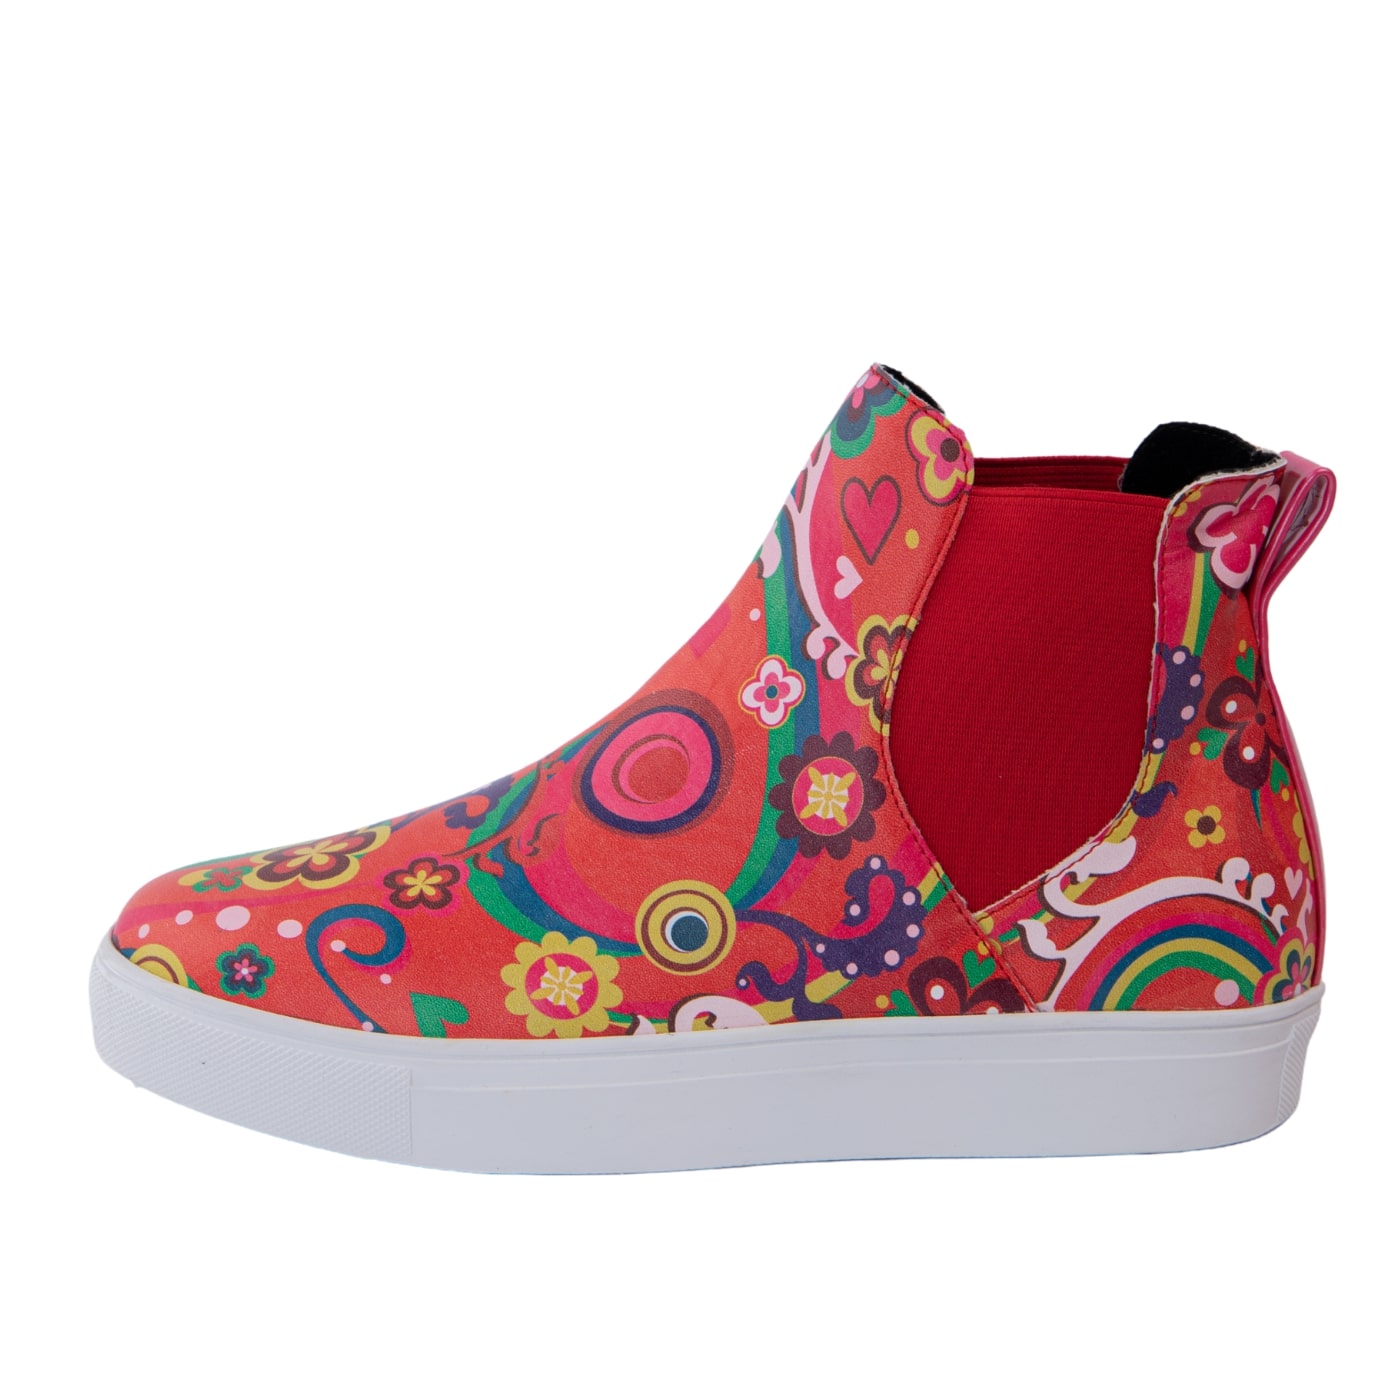 Groovy Remix Hi Tops by RainbowsAndFairies.com.au (Psychedelic - Chelsea Boots - Woodstock - Hippy - Vibrant - Mismatched Shoes - Elastic Side Boots) - SKU: FW_HITOP_GROOV_REM - Pic-04